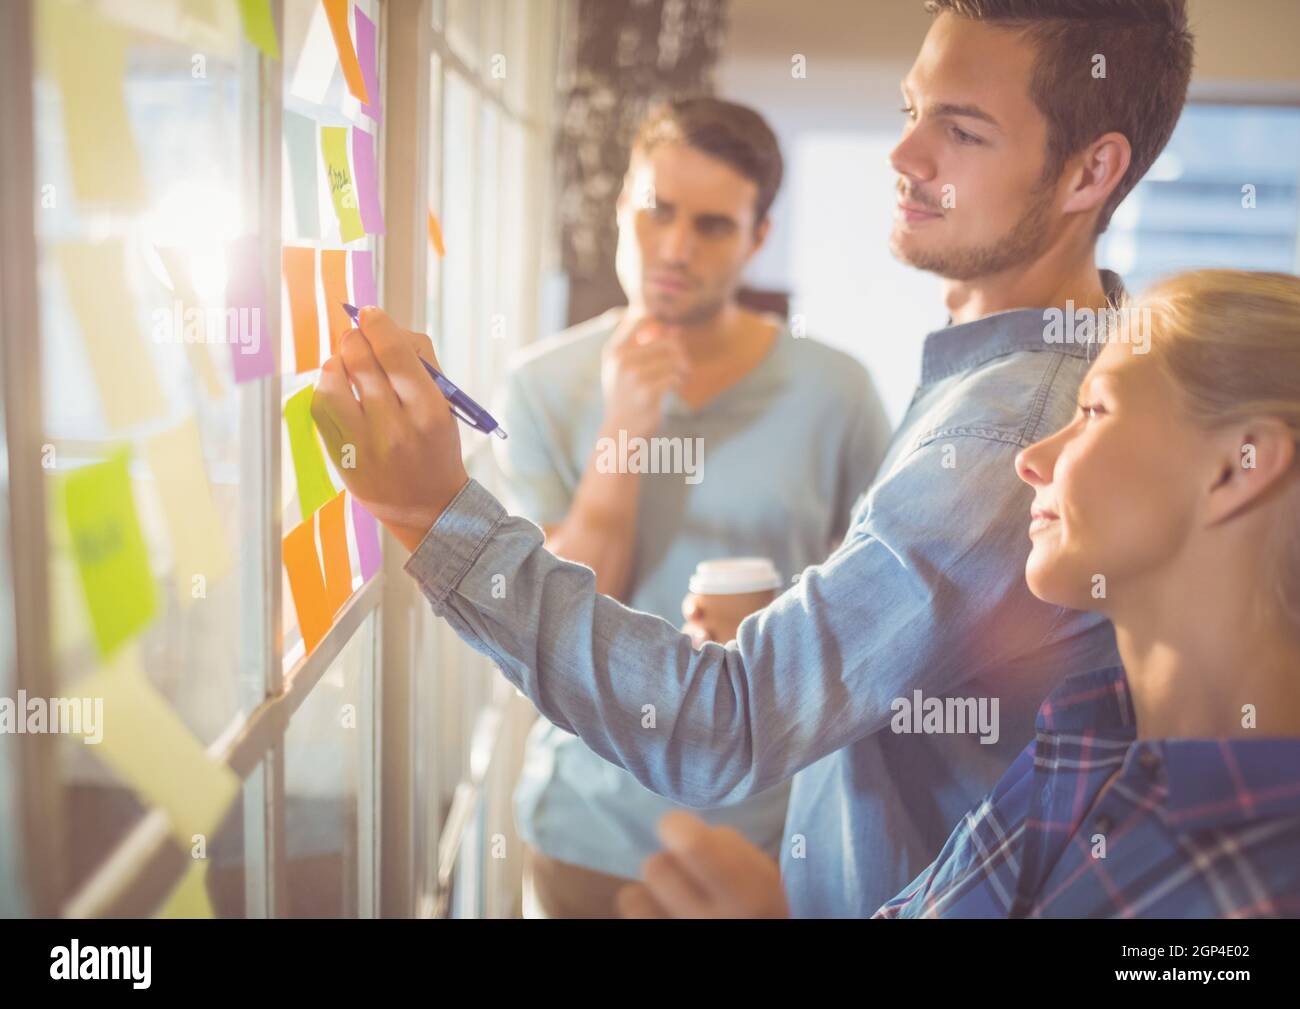 Composition of caucasian business people taking notes on glass wall Stock Photo